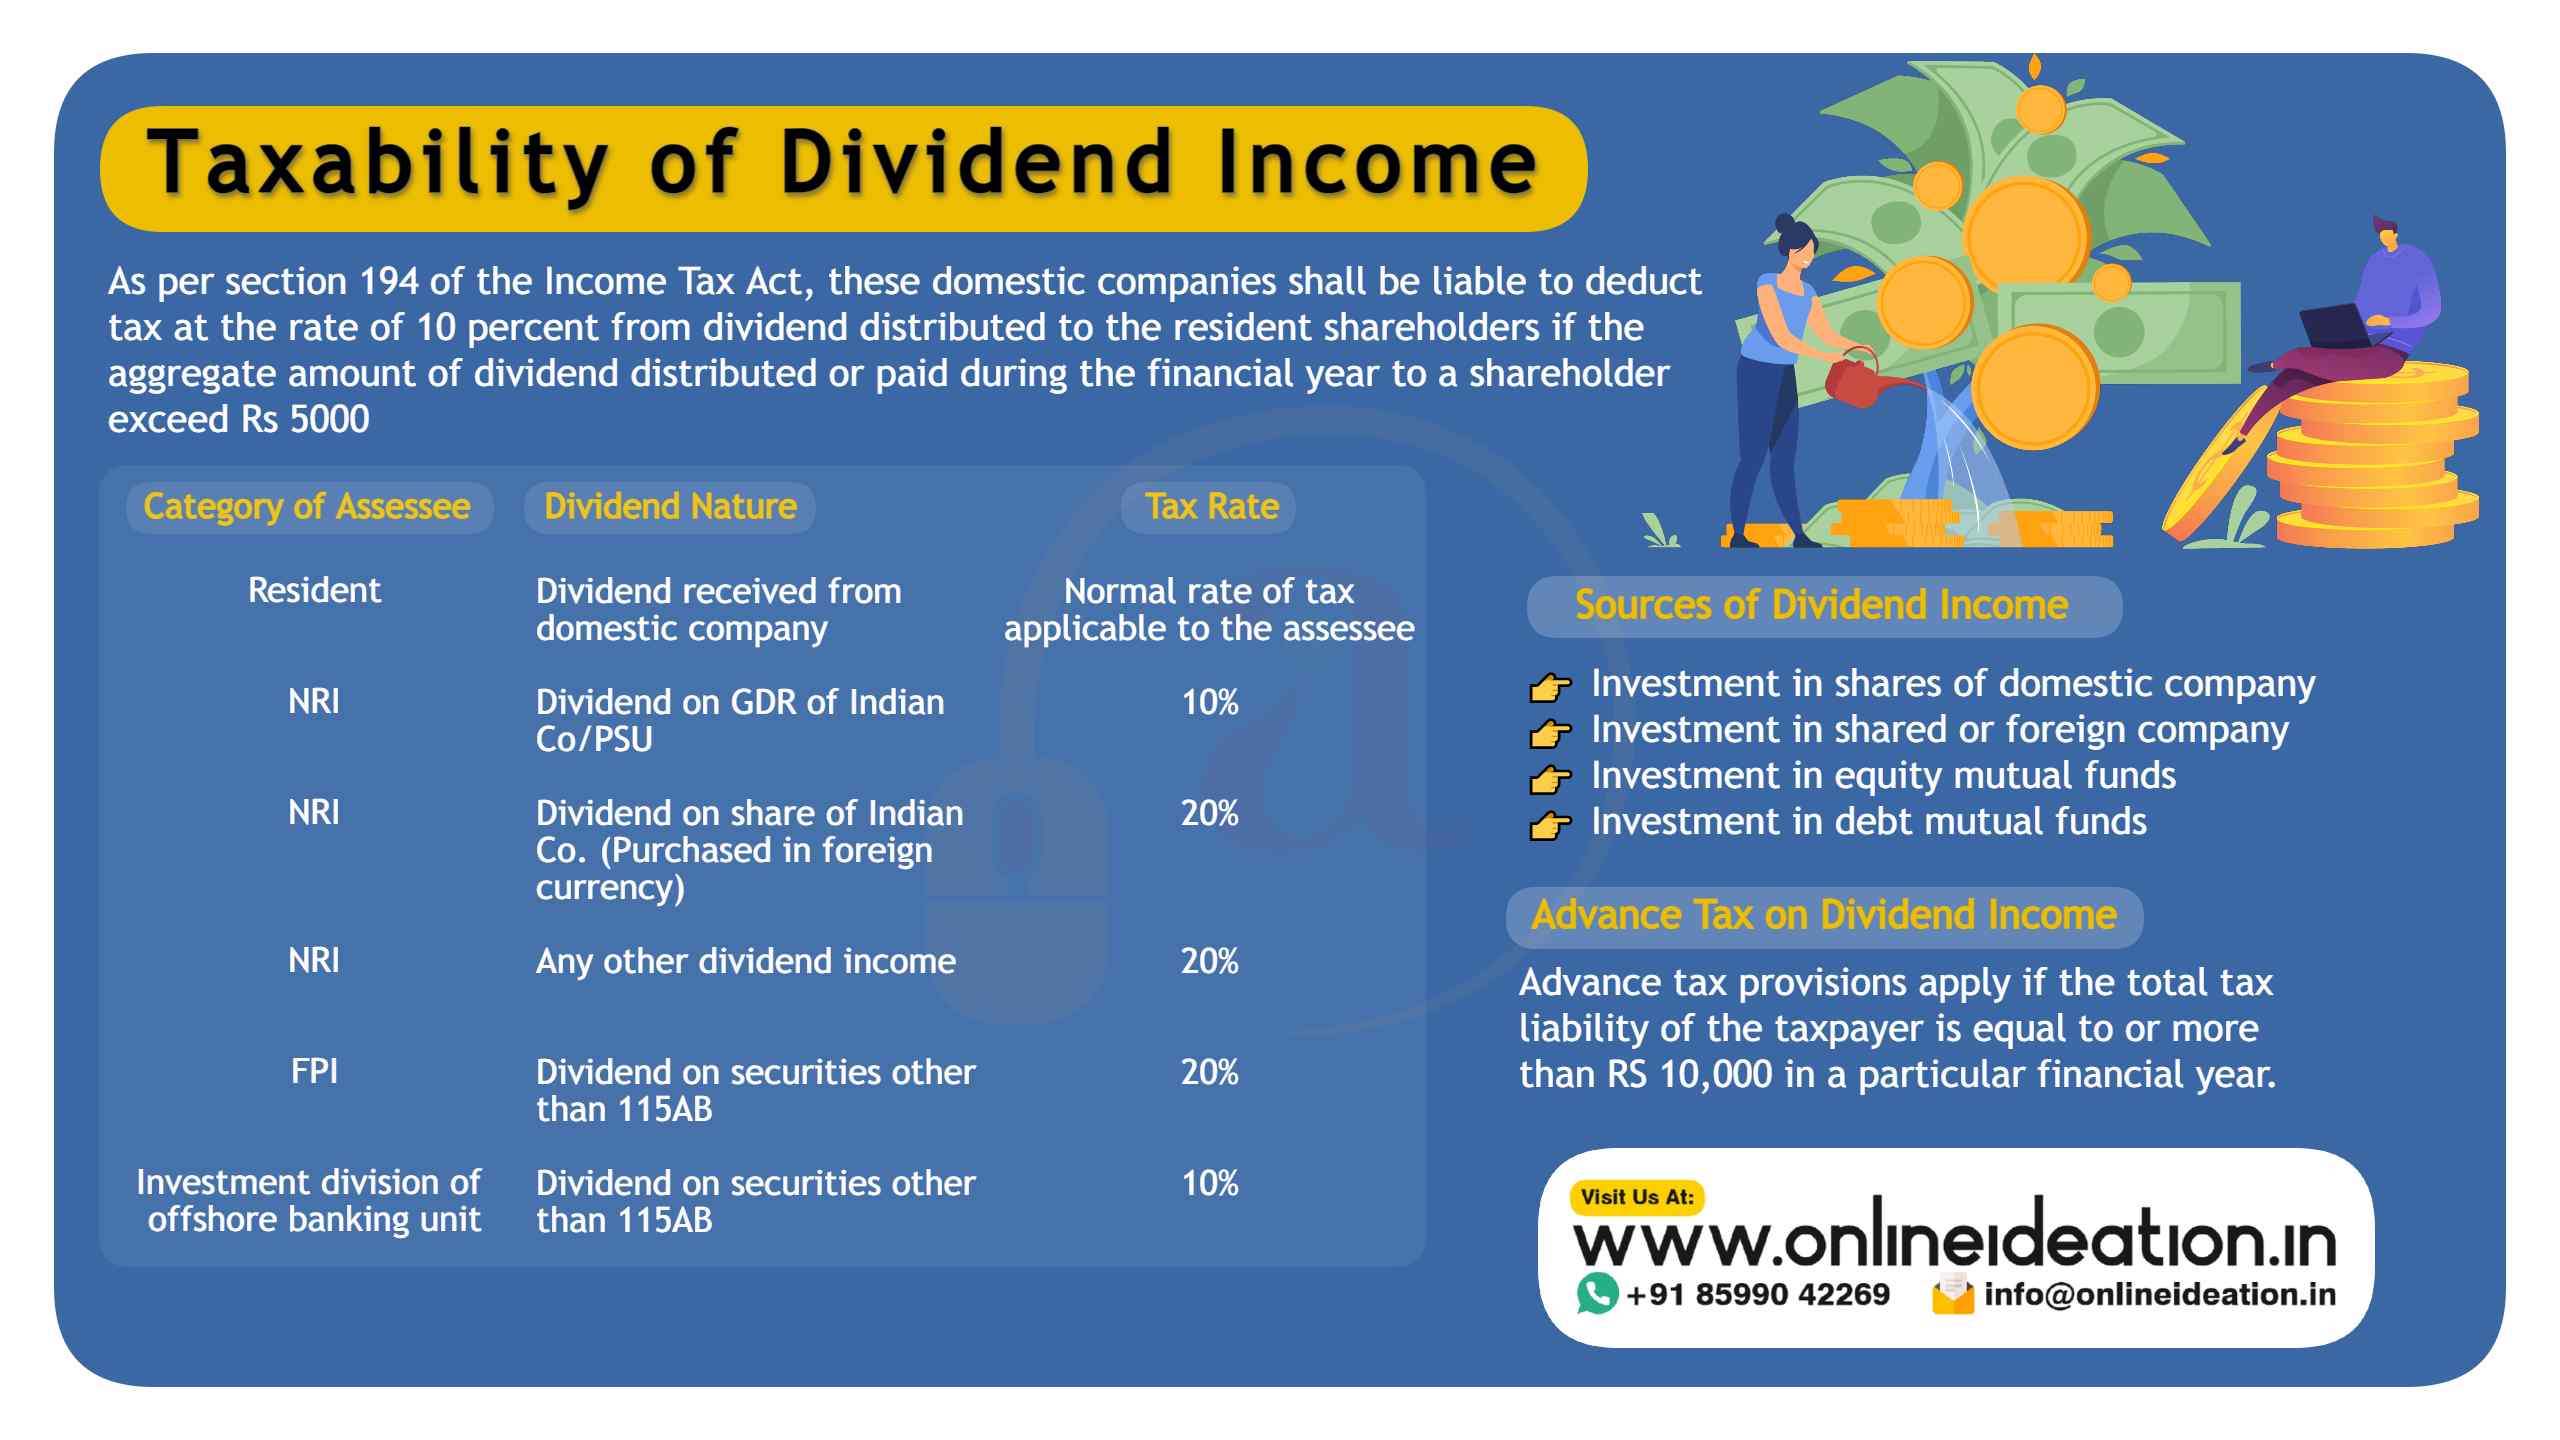 taxability-of-dividend-income-everything-you-need-to-know-onlineideation